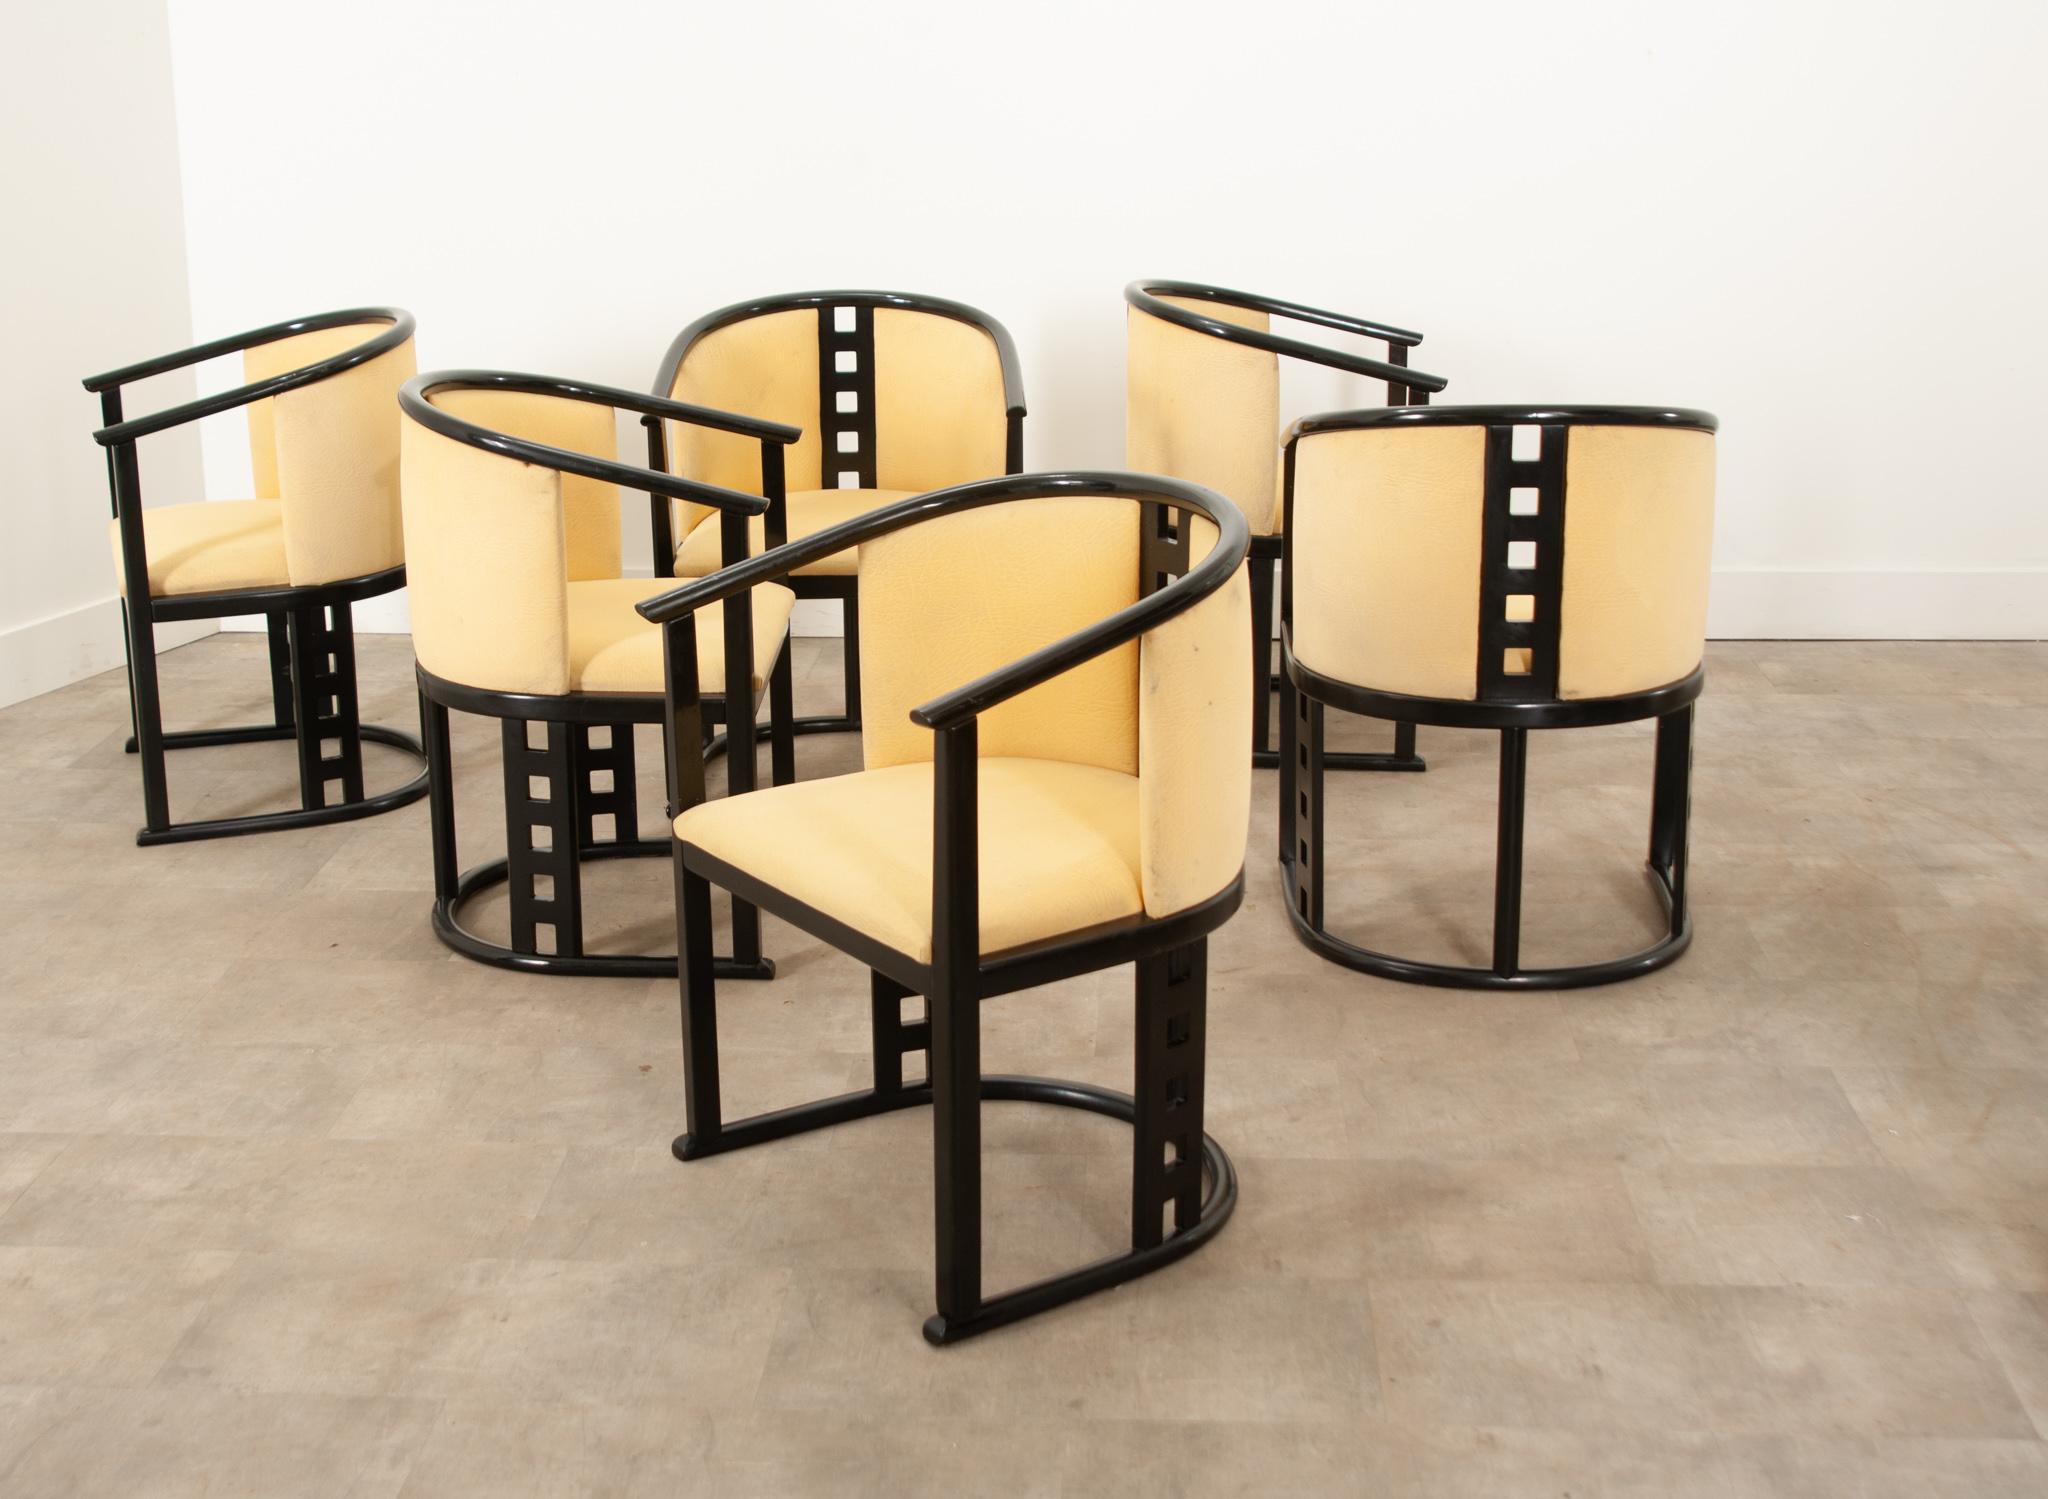 A fantastic set of Josef Hoffmann Vienna Secession style chairs. These chairs feature bentwood construction with attractive simple, clean lines and plenty of negative space. Pierced ladder backs, side stretchers and wide barrel shapes, key design